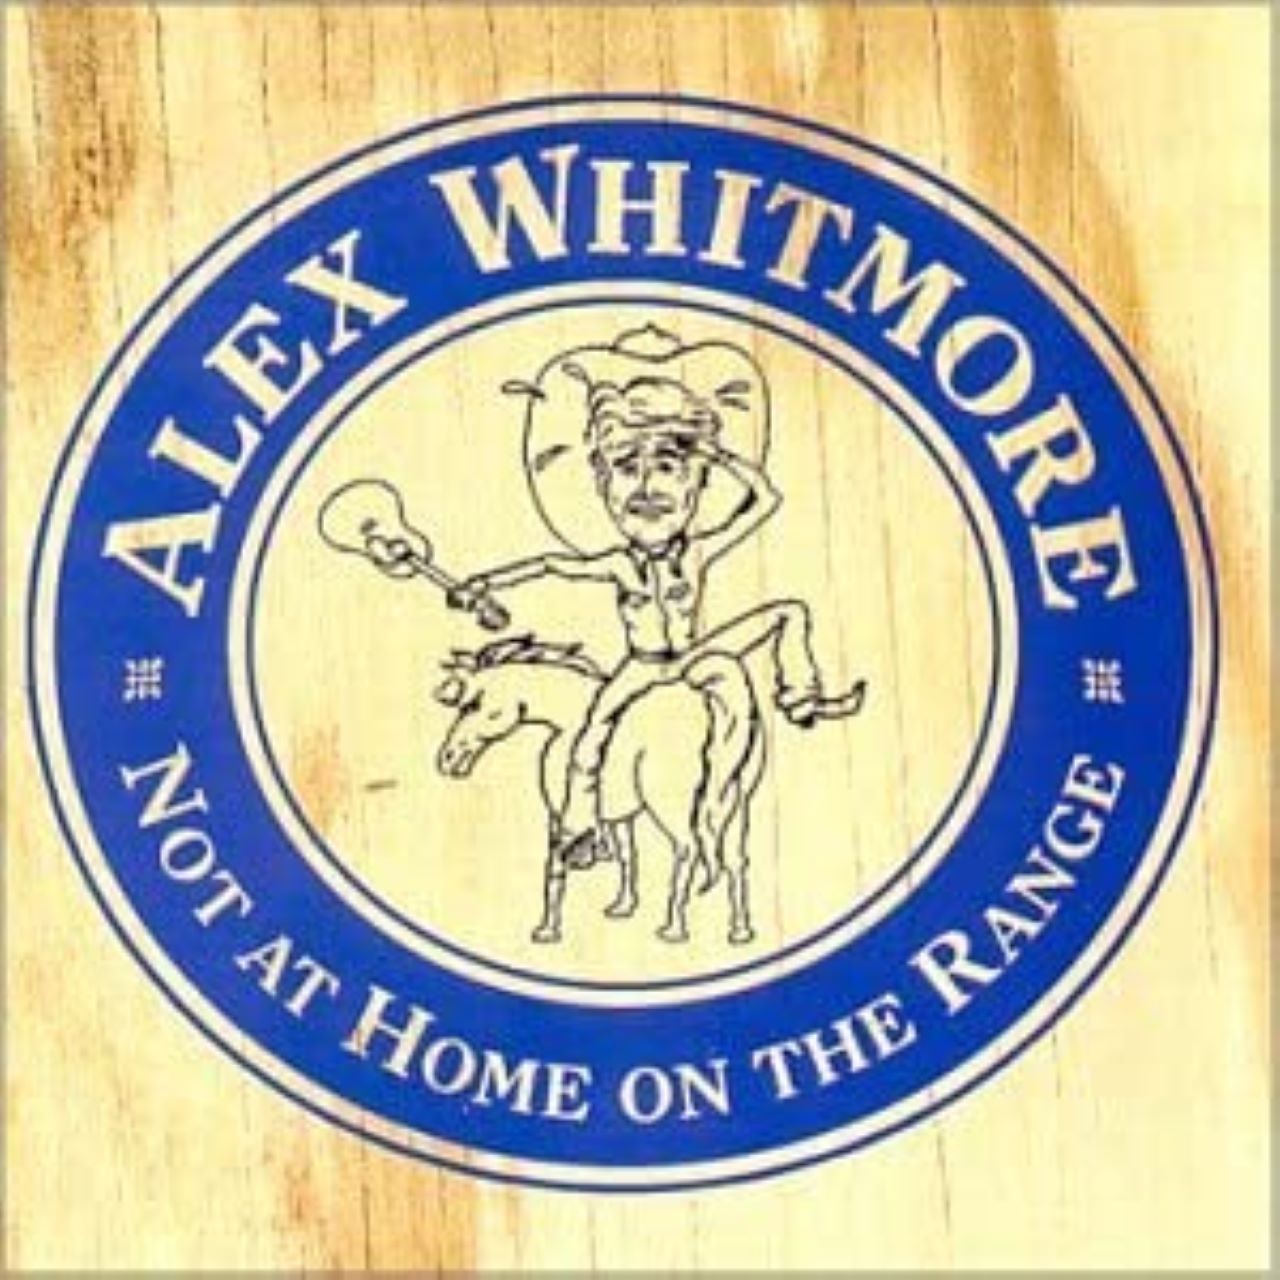 Alex Whitmore - Not At Home On The Range cover album